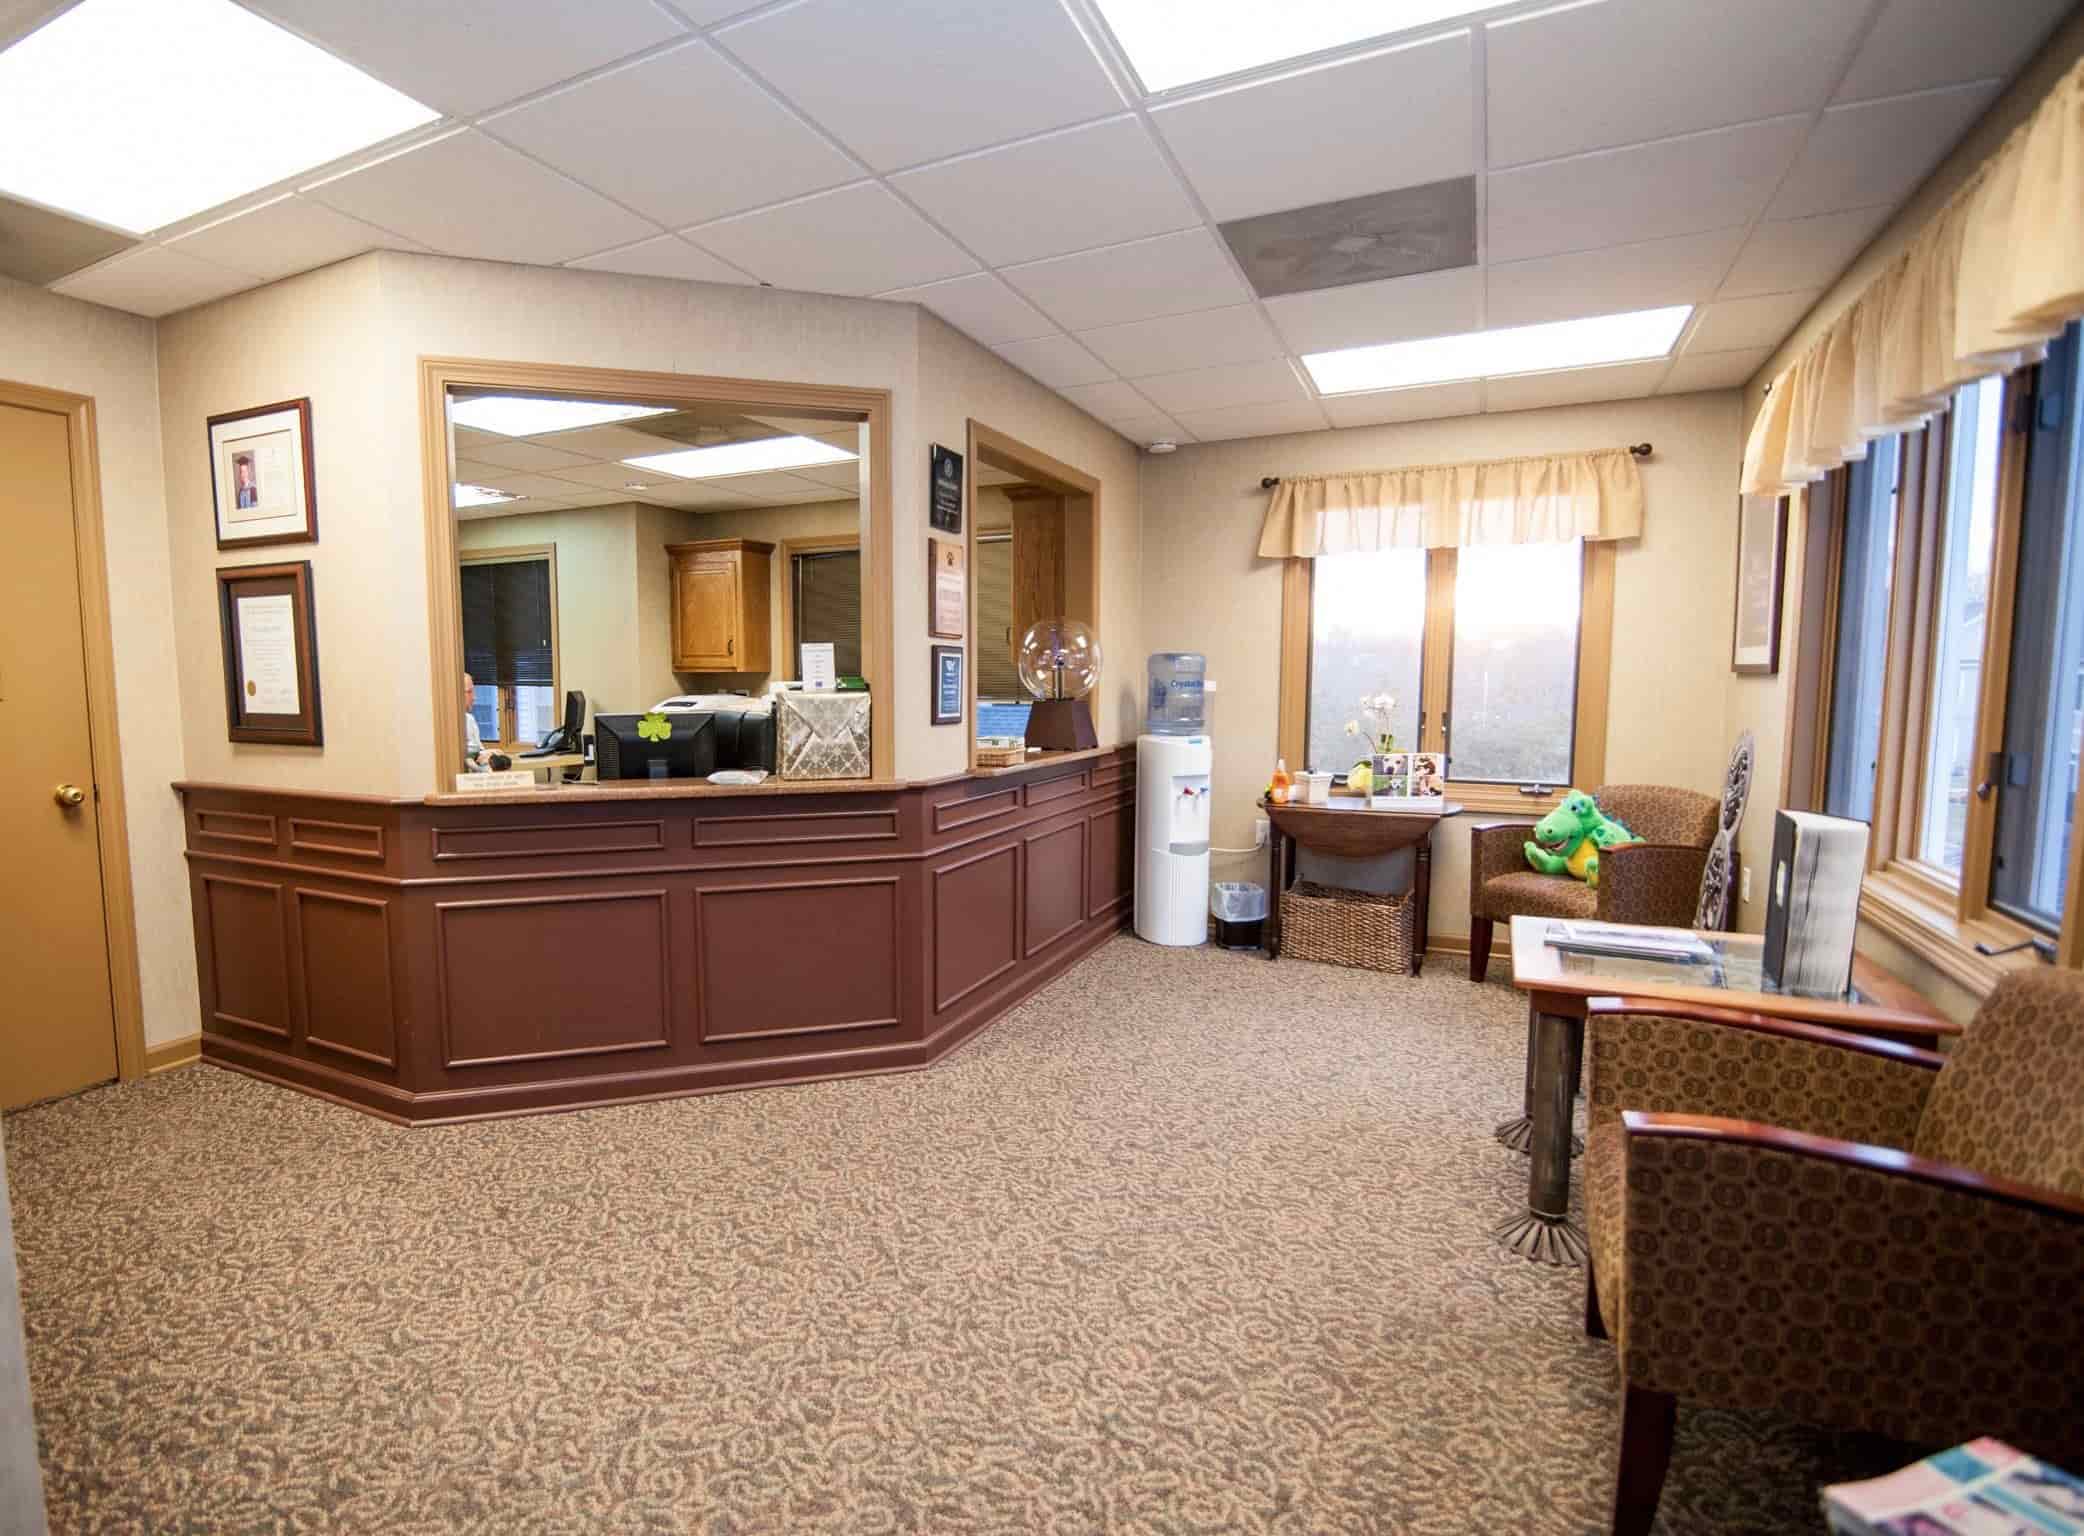 Southington Dentistry | Plantsville Sixth Month Smiles, Contouring and Bonding and Dentures